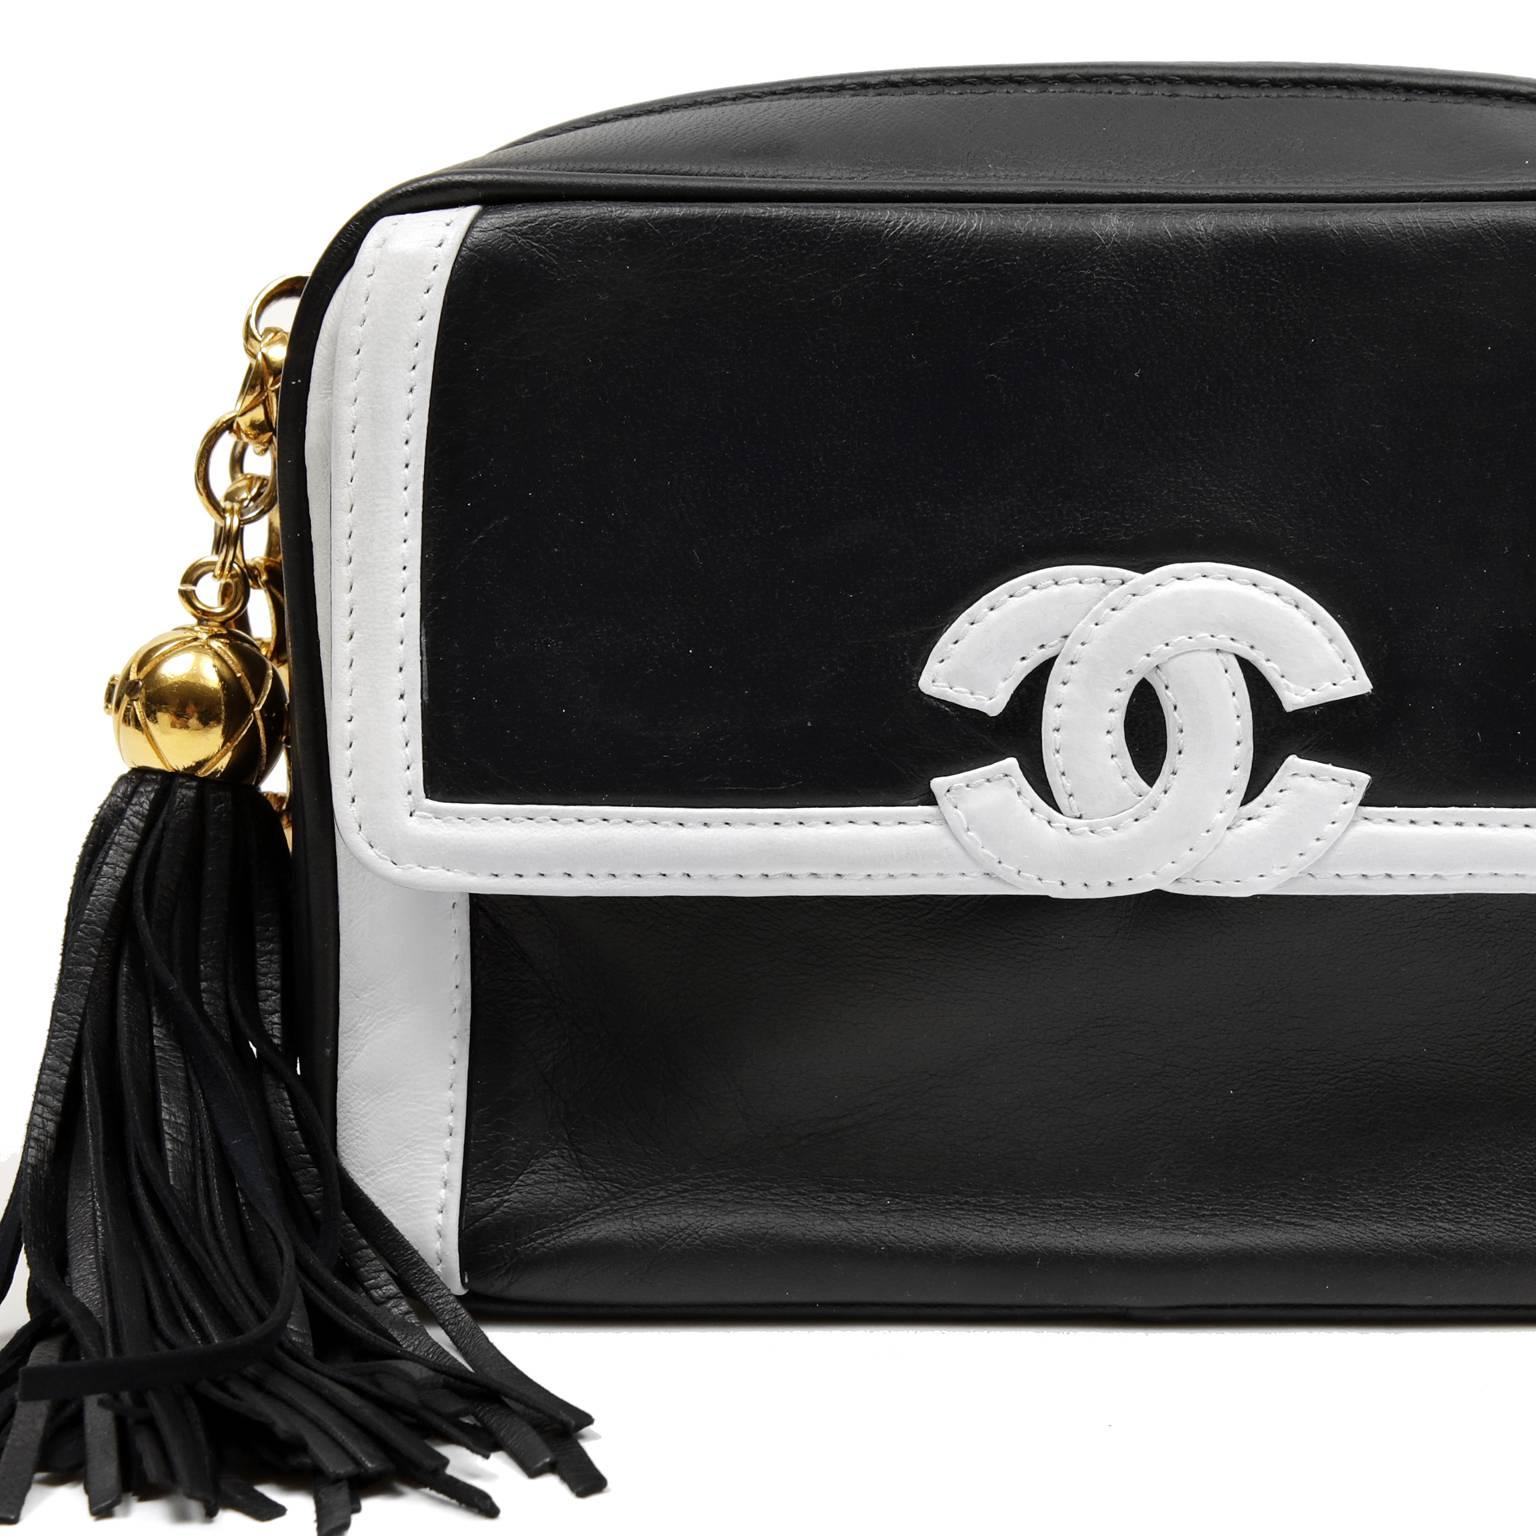 Chanel Navy and White Leather Camera Bag 1